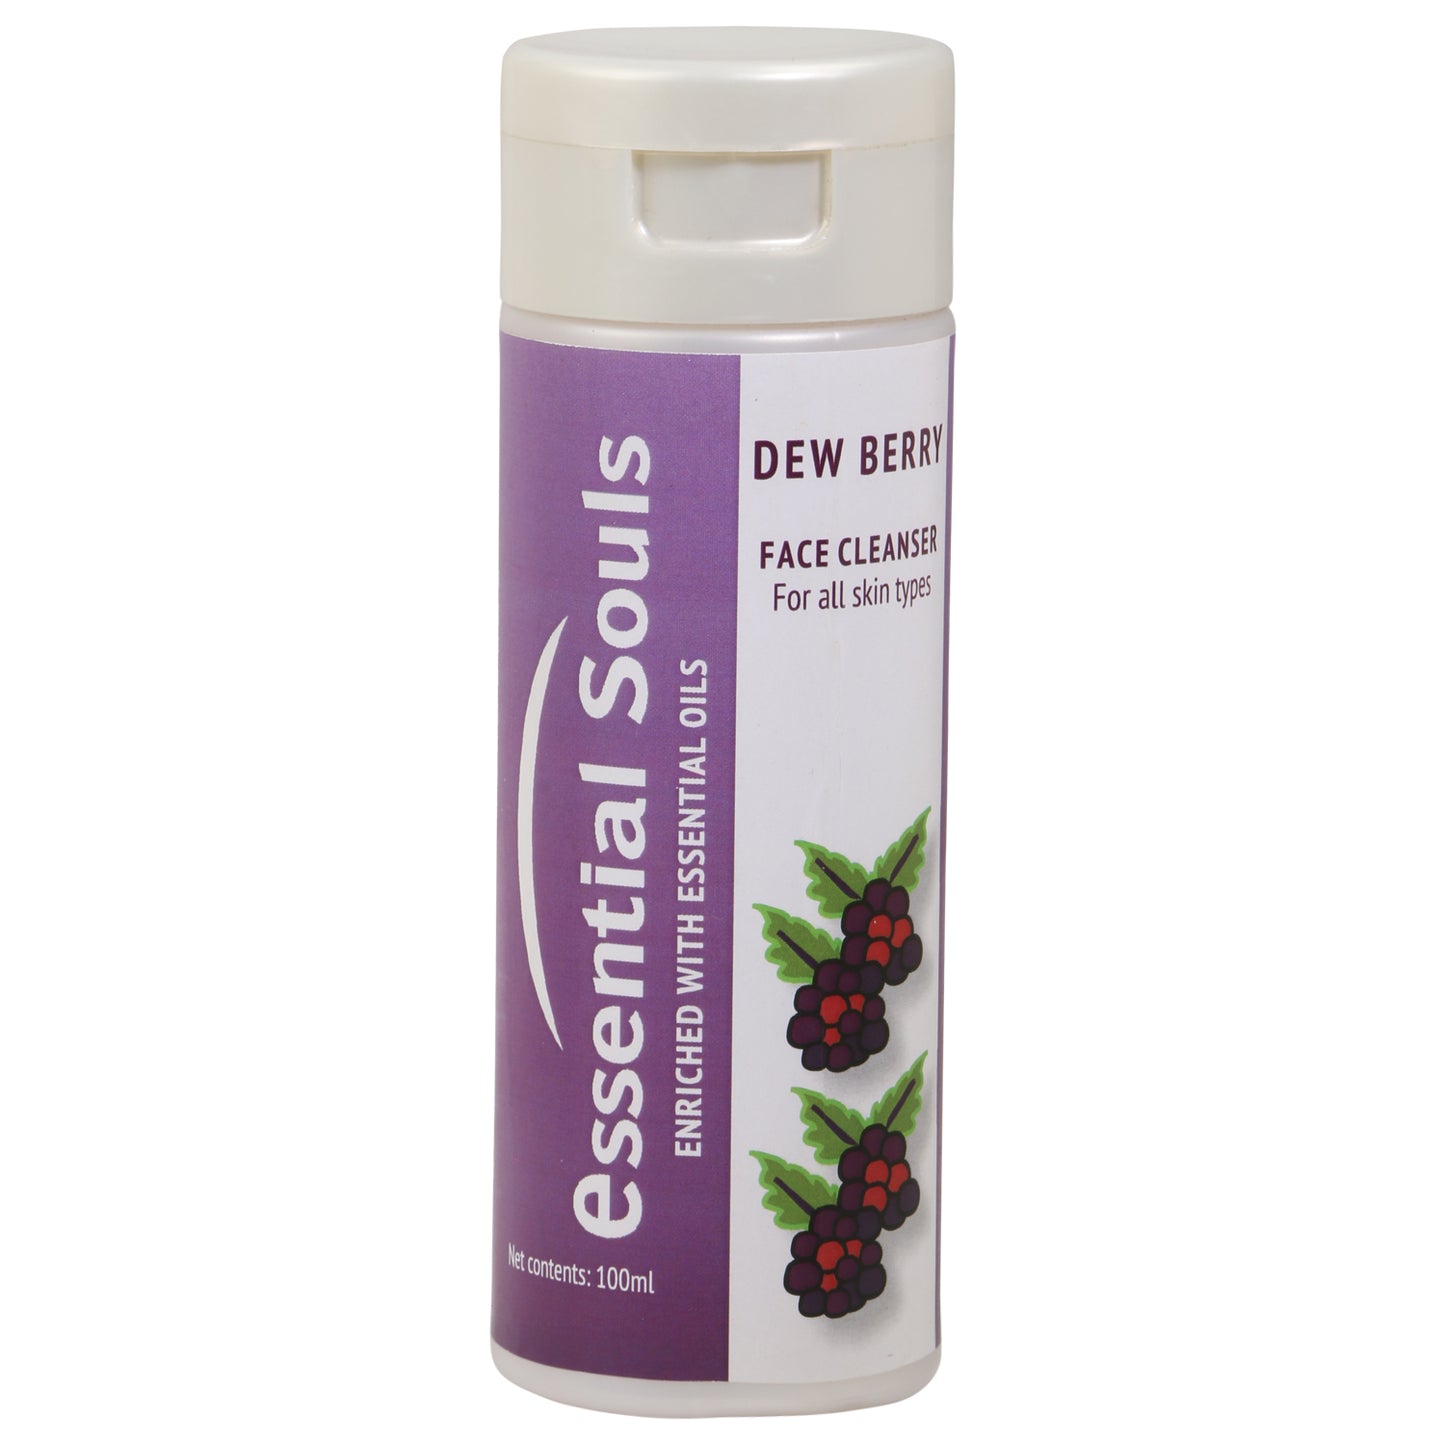 Essential Souls Dew Berry Cleanser - 100ml